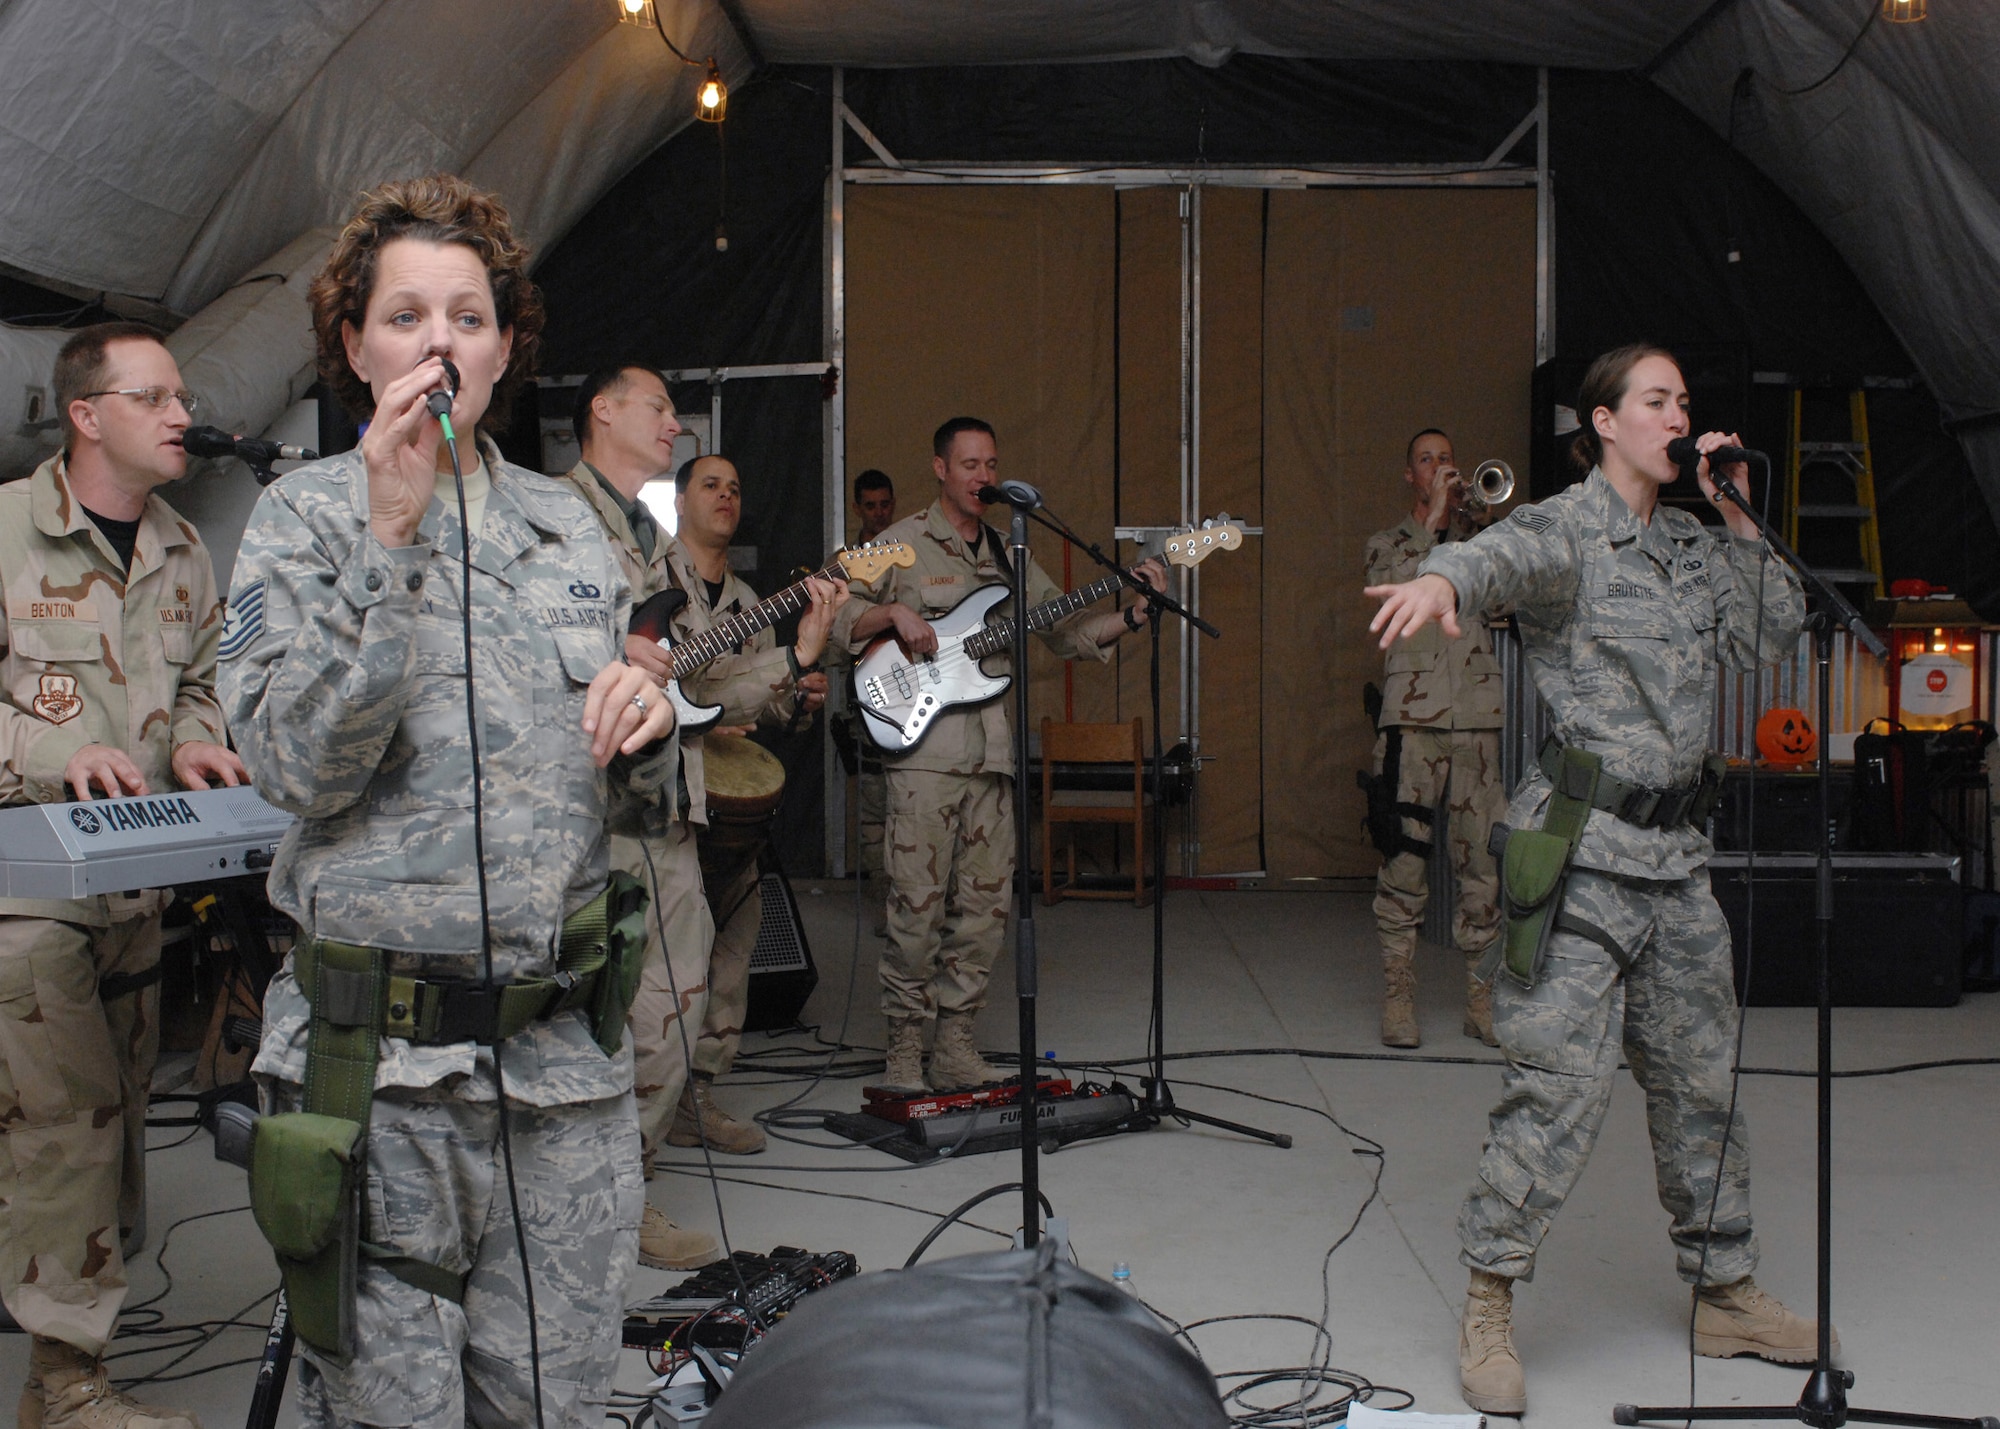 BAGRAM AIR BASE, Afghanistan - 'Live Round' provided morale-lifting music for Airmen here Feb. 24. 'Live Round' is the U.S. Air Forces Central band that performs for servicemen and women and local communities throughout Southwest Asia. (U.S. Air Force photo by Master Sgt. Demetrius Lester)